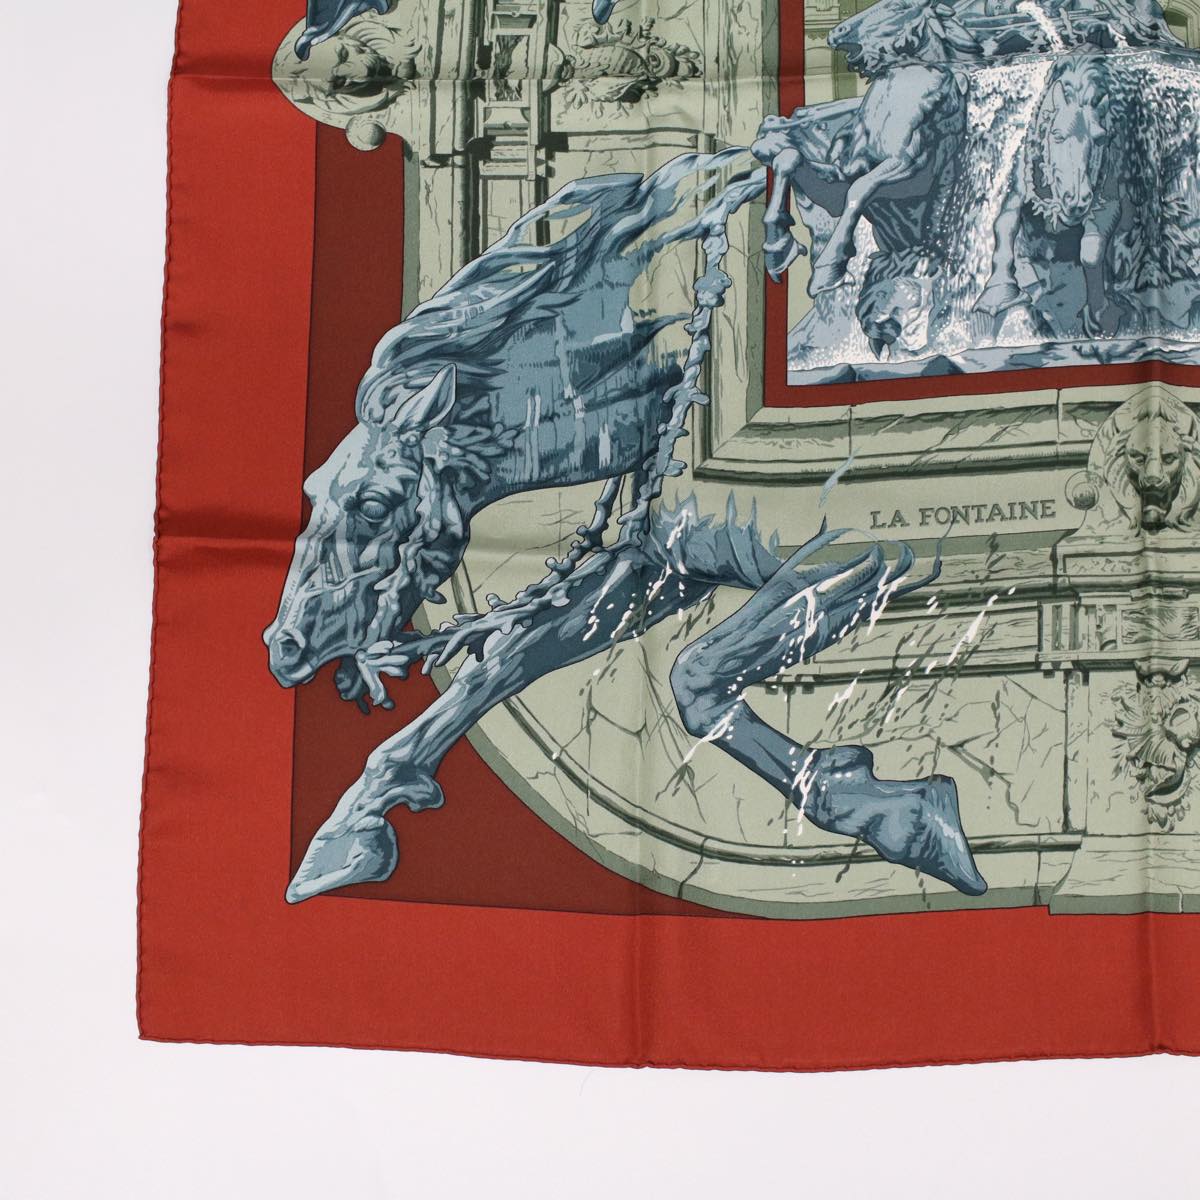 HERMES Carre 90 Scarf ""LA FONTAINE DE BARTHOLDI"" Silk Red Auth bs6382